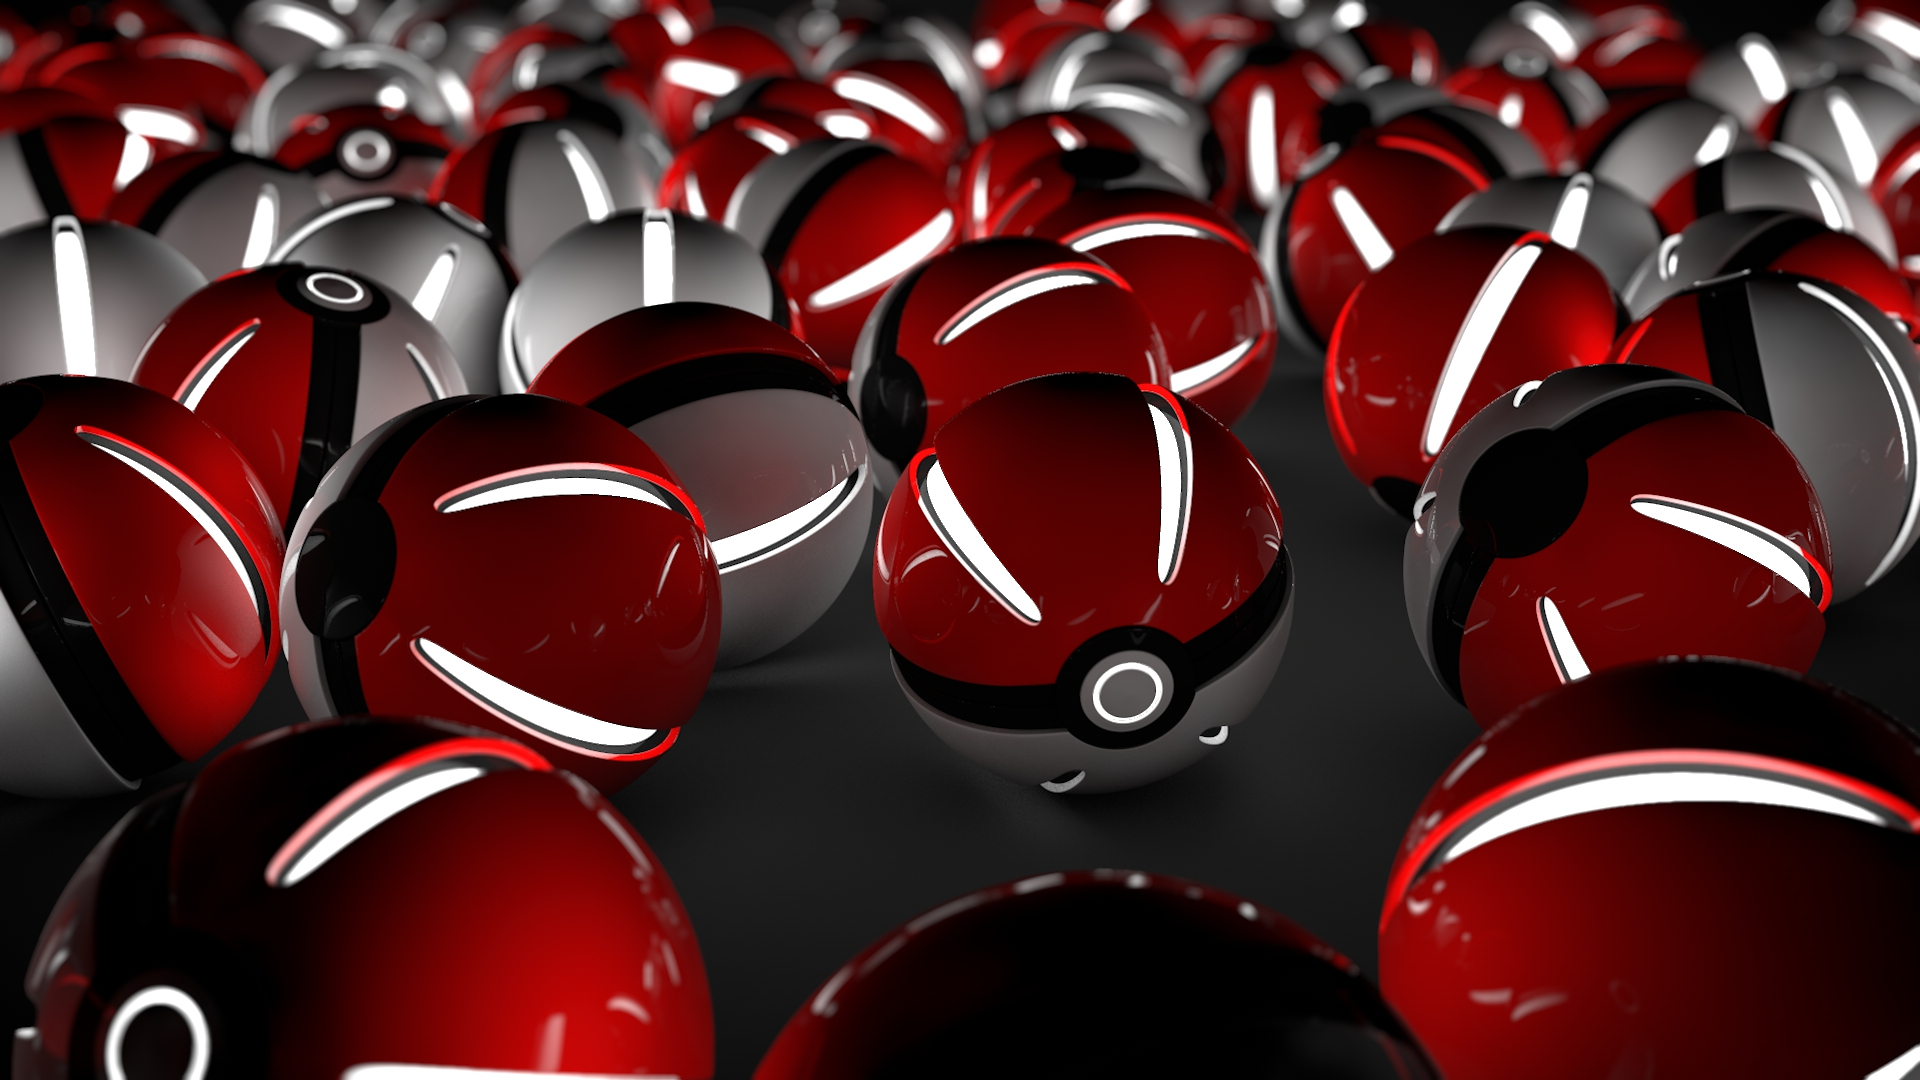 1920x1080 110+ Pokeball HD Wallpapers and Backgrounds